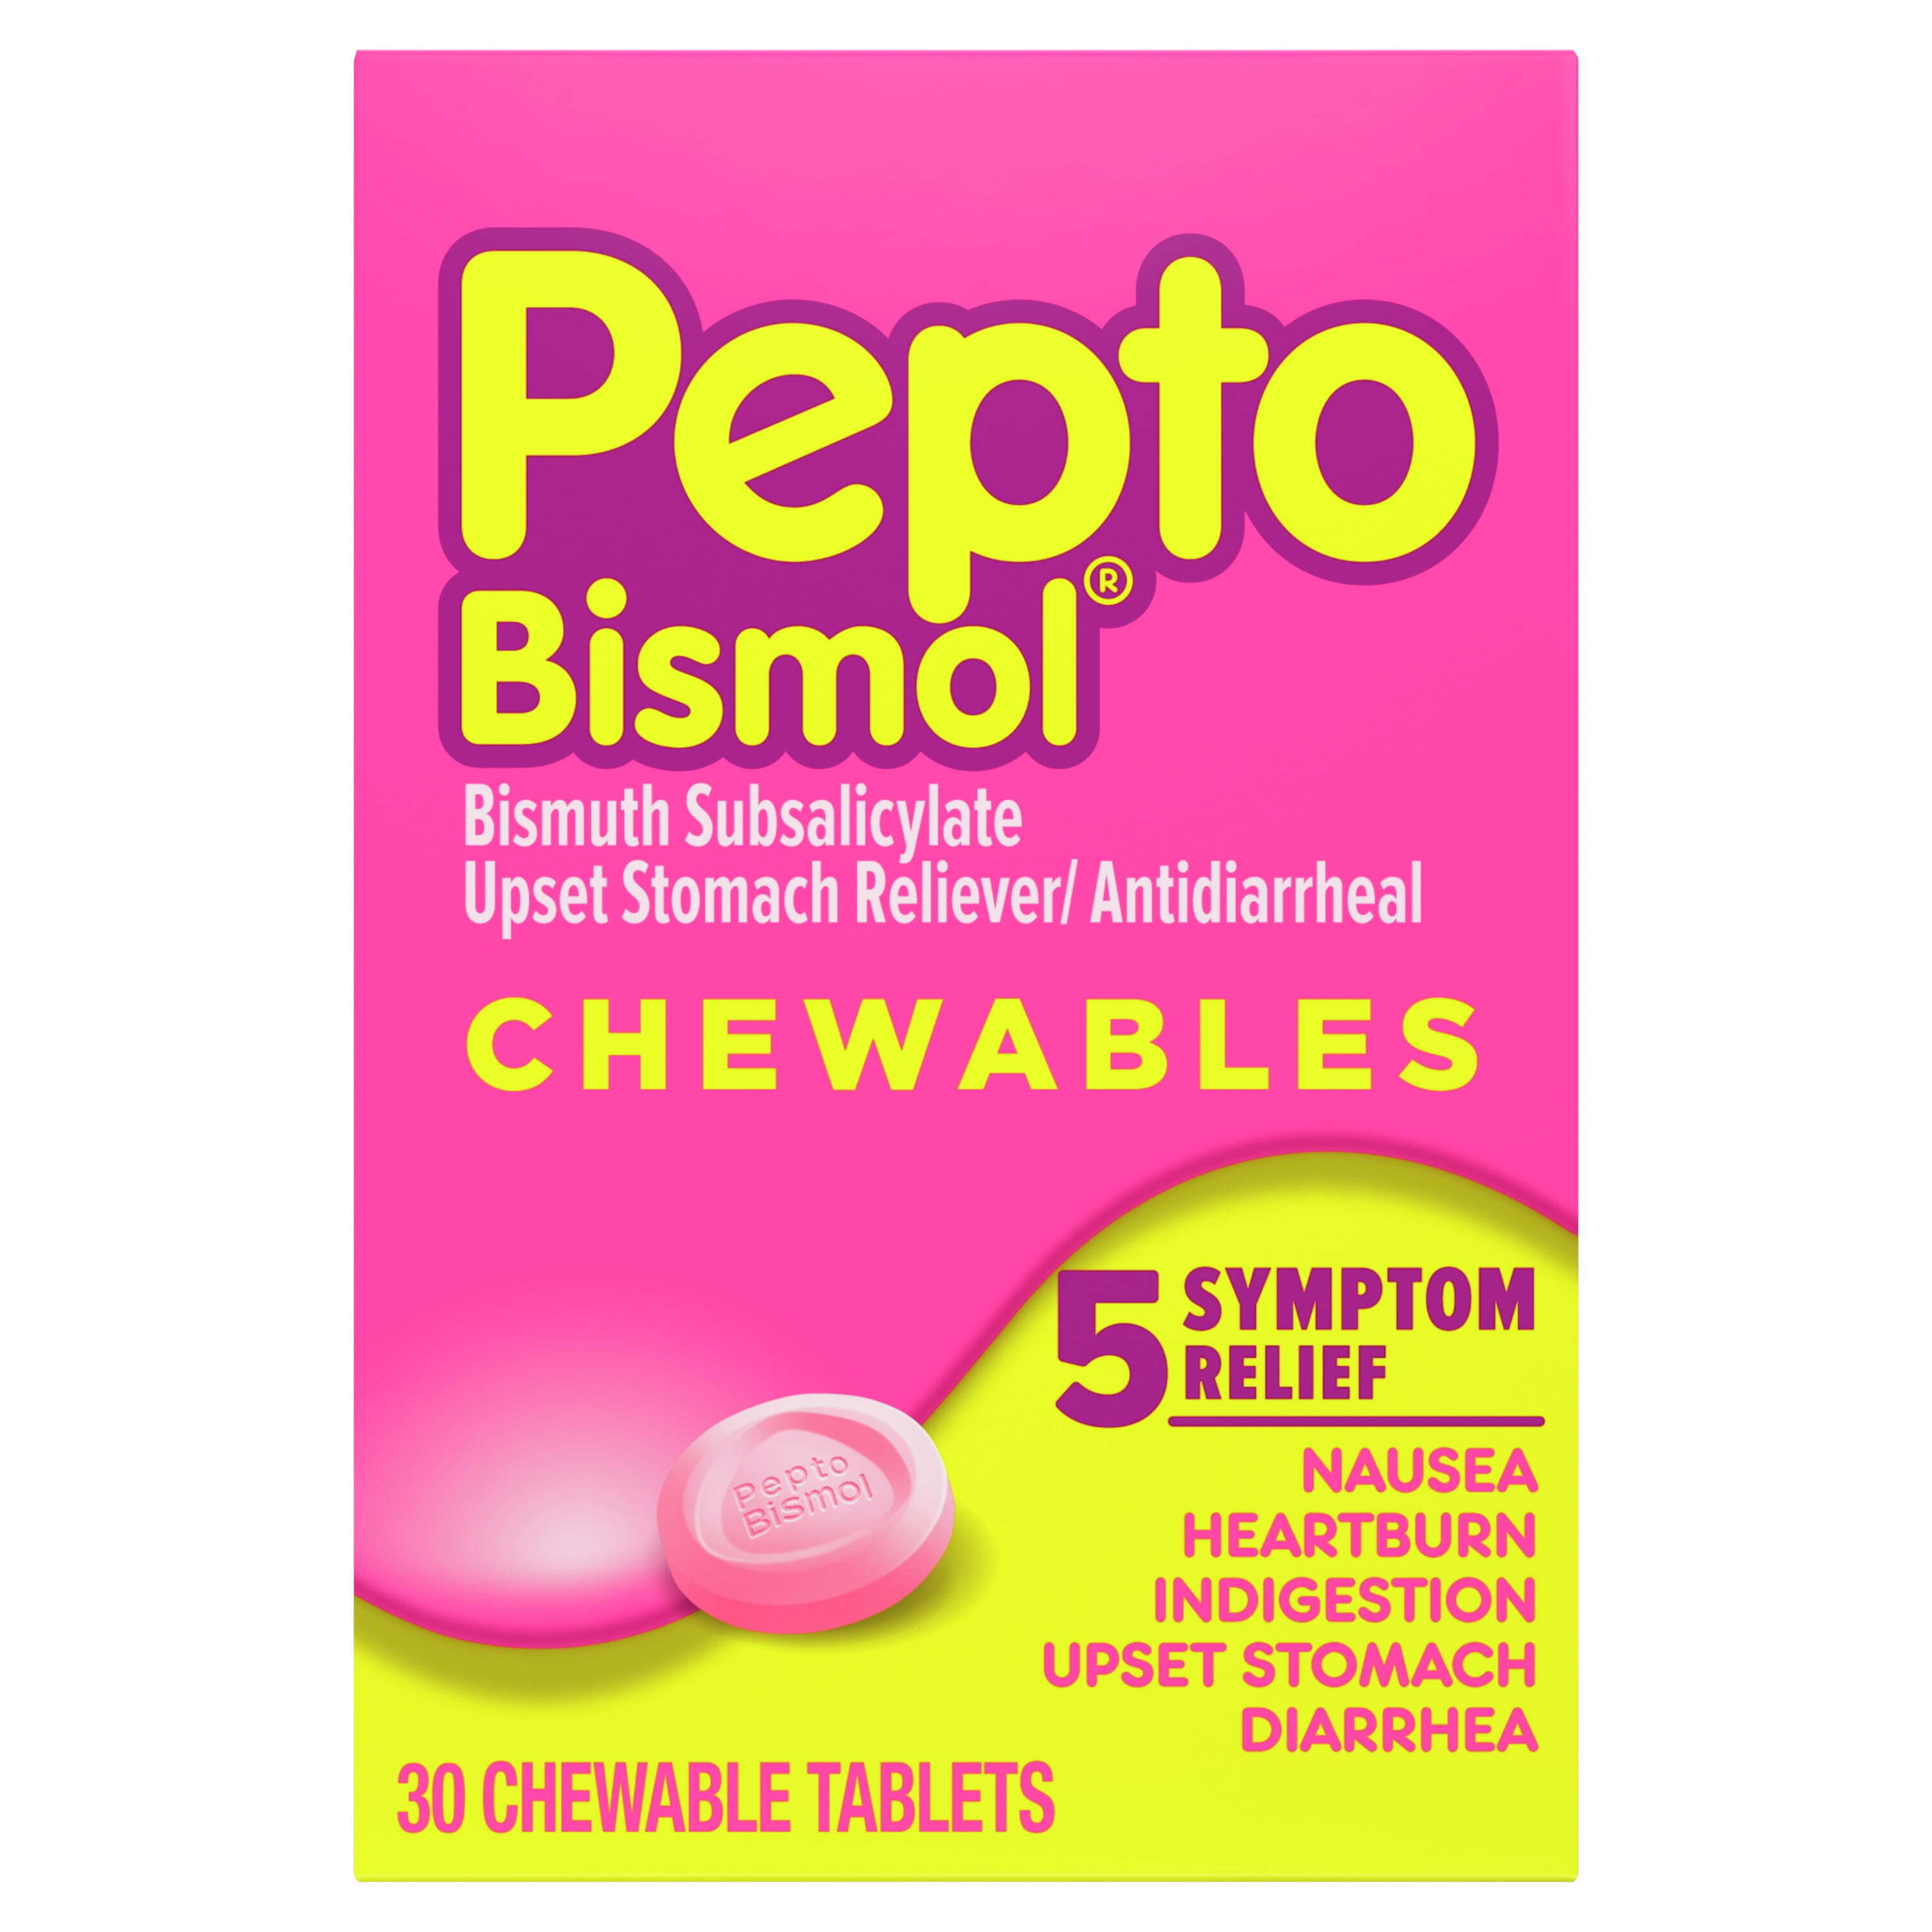 Pepto Bismol Chewable Tablets Upset Stomach & Diarrhea Relief, over-The-Counter Medicine, Orig 30 Ct - image 1 of 7